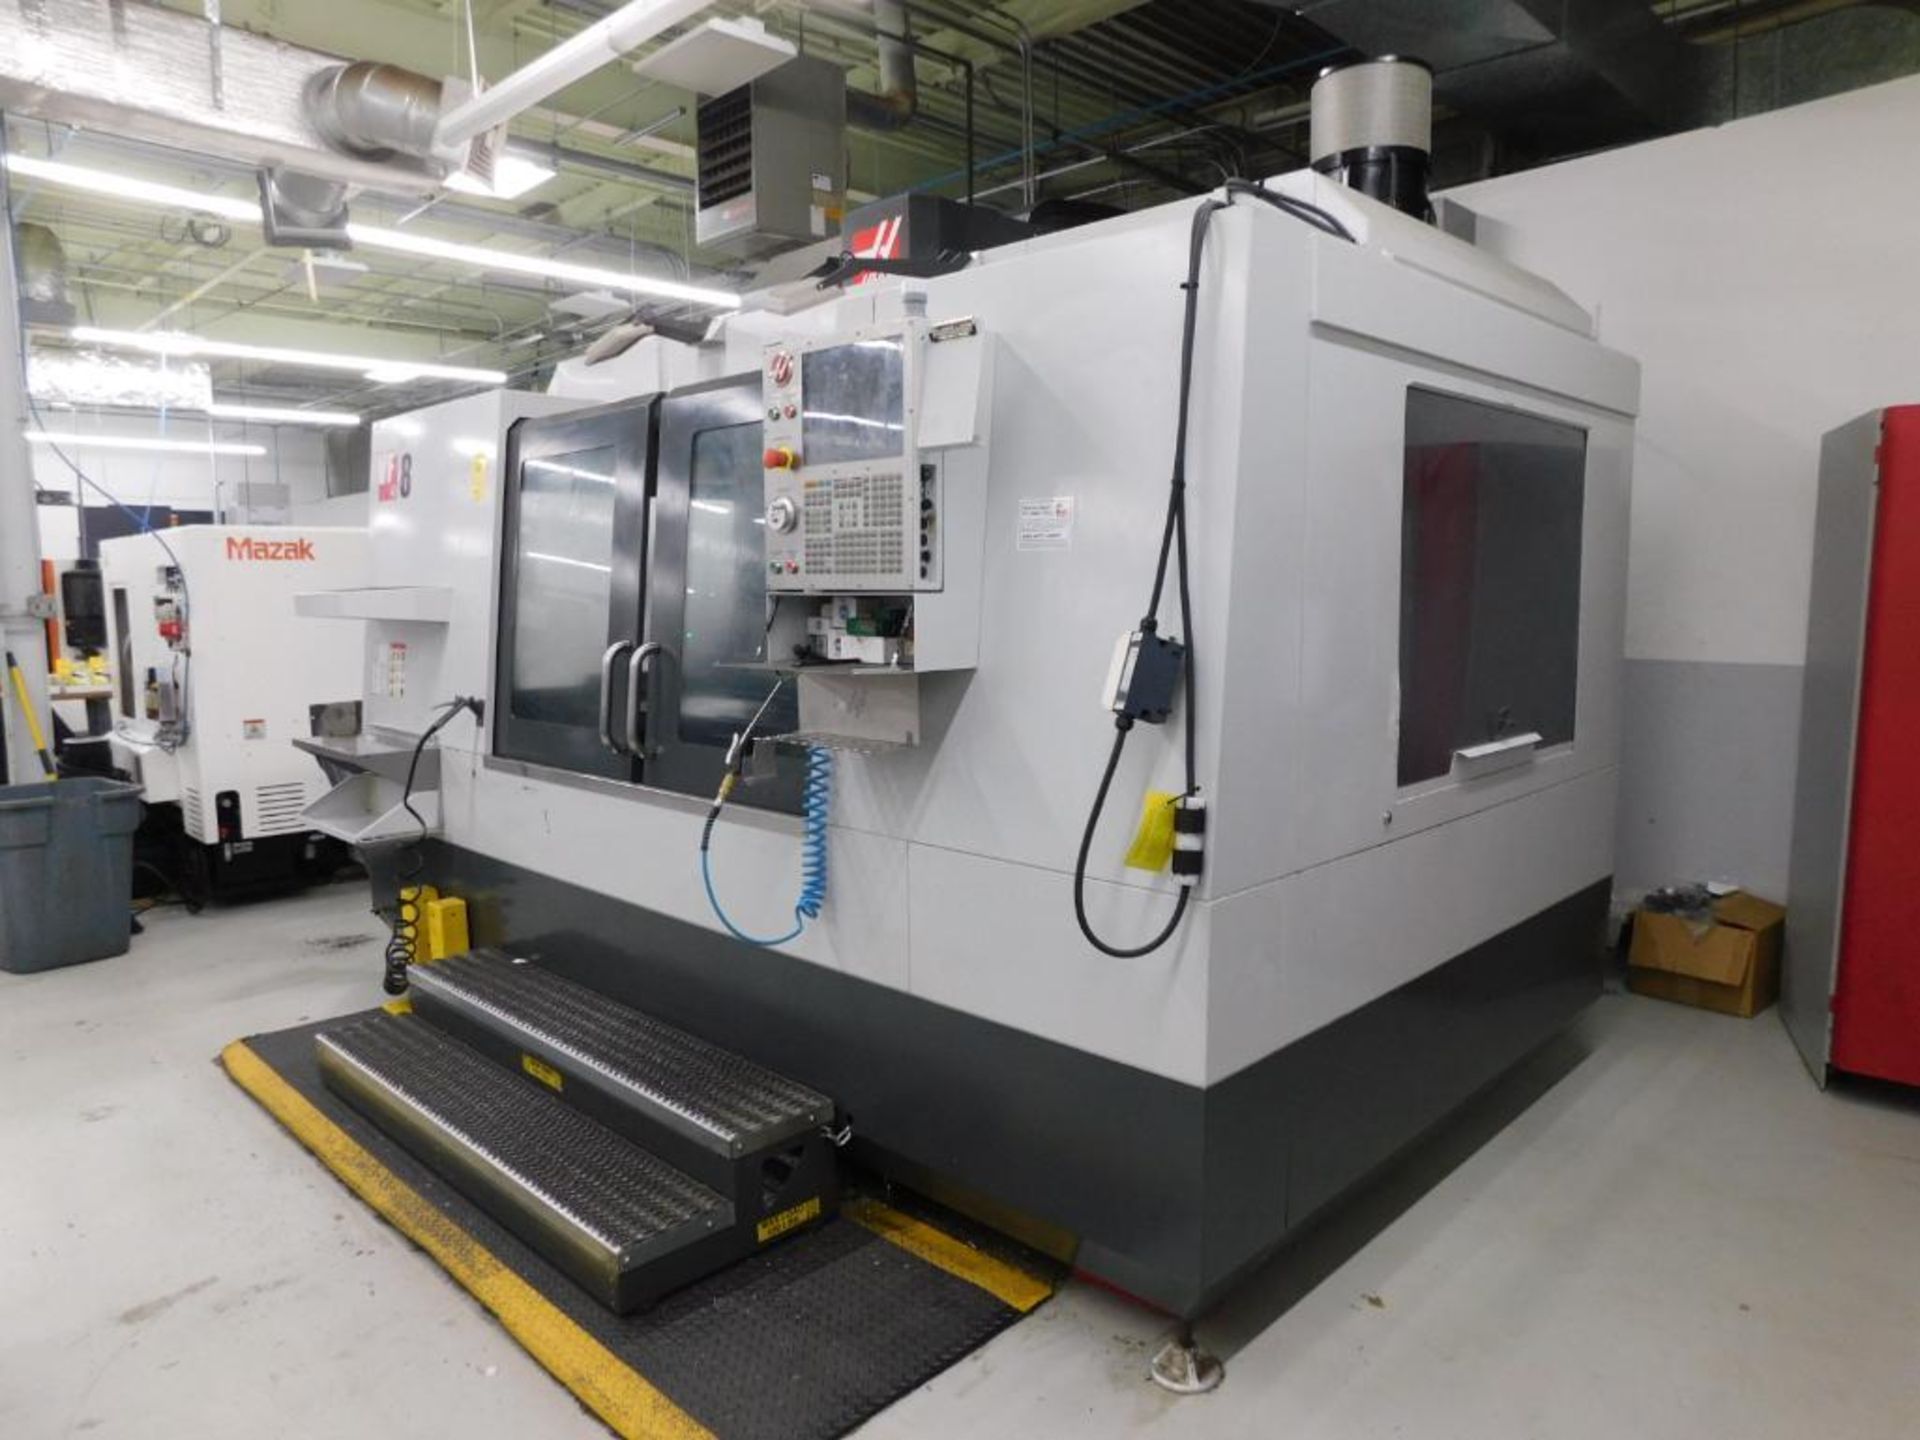 Haas VF-8/40 CNC Vertical Machining Center, Haas CNC Control w/Hand Pendant, Travels: X-64", Y-40", - Image 4 of 15